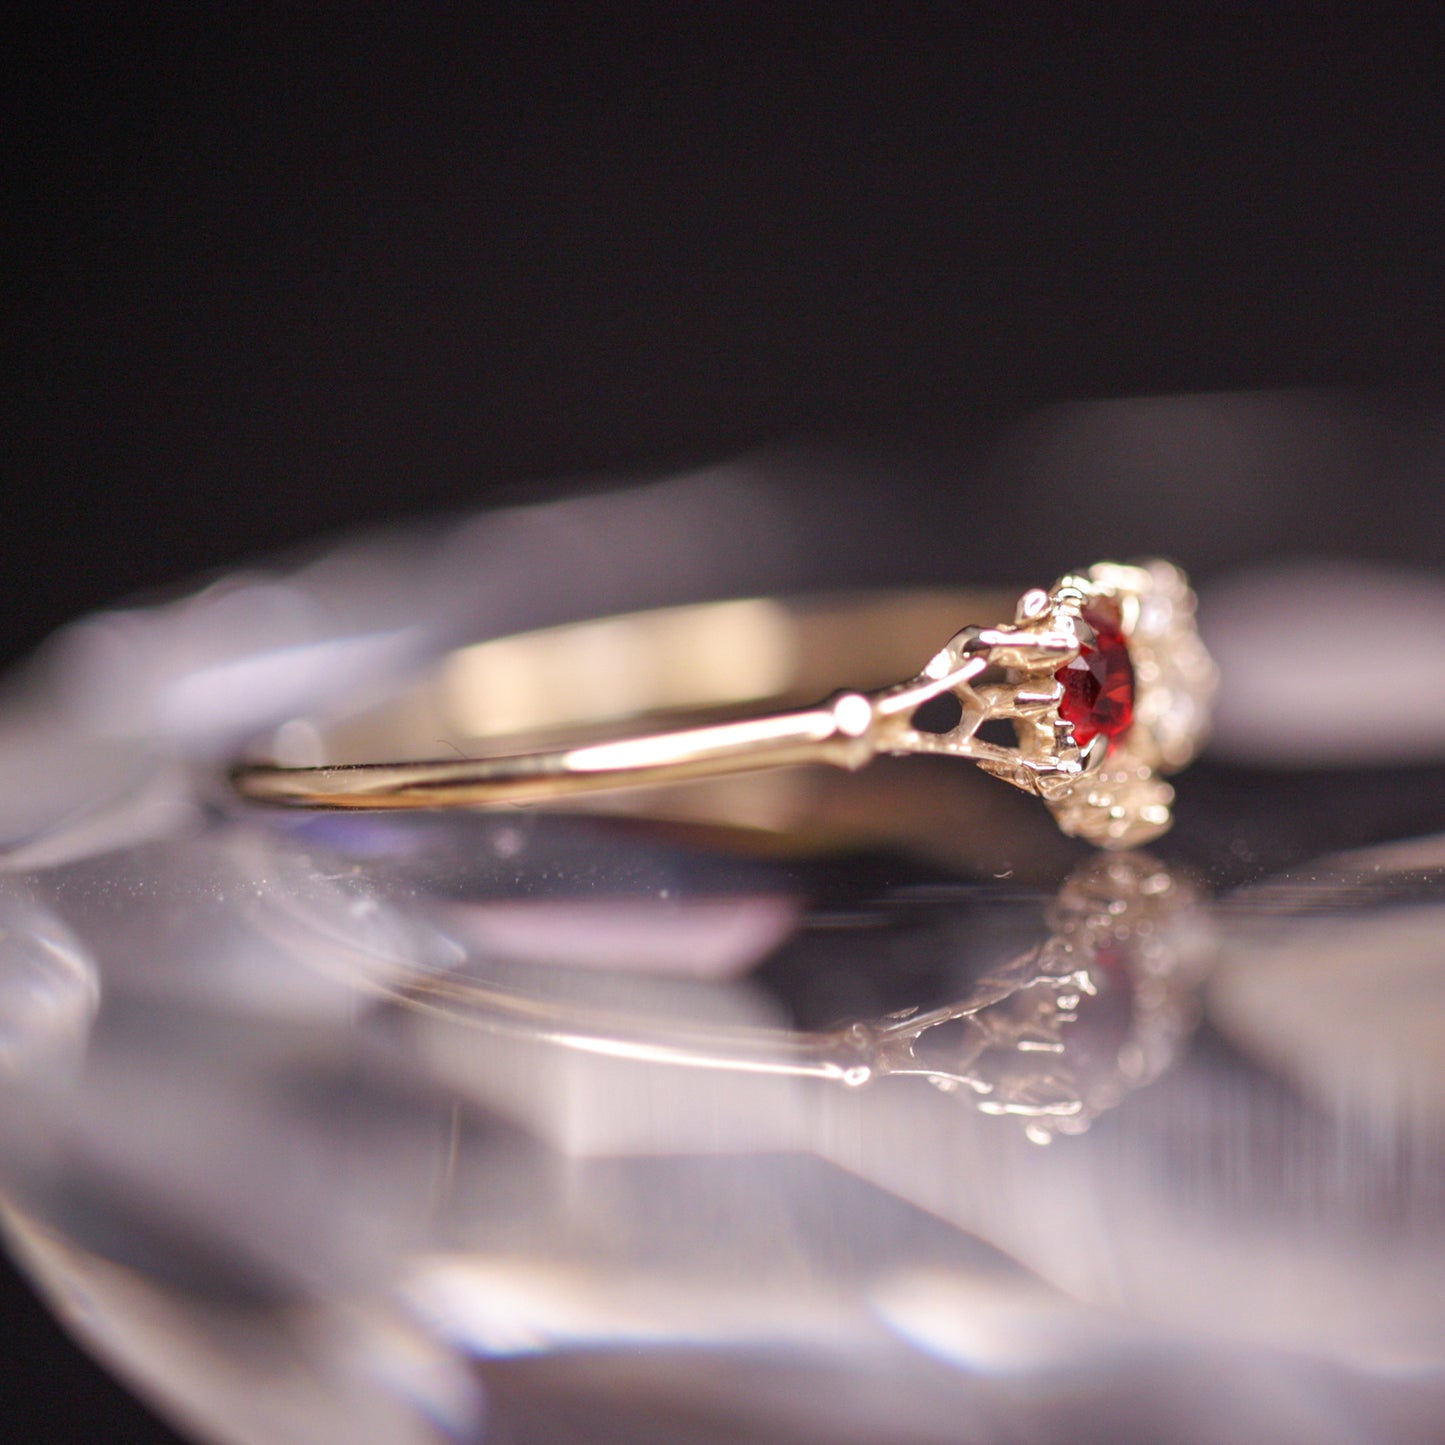 632 Red spinel / Diamond Ring